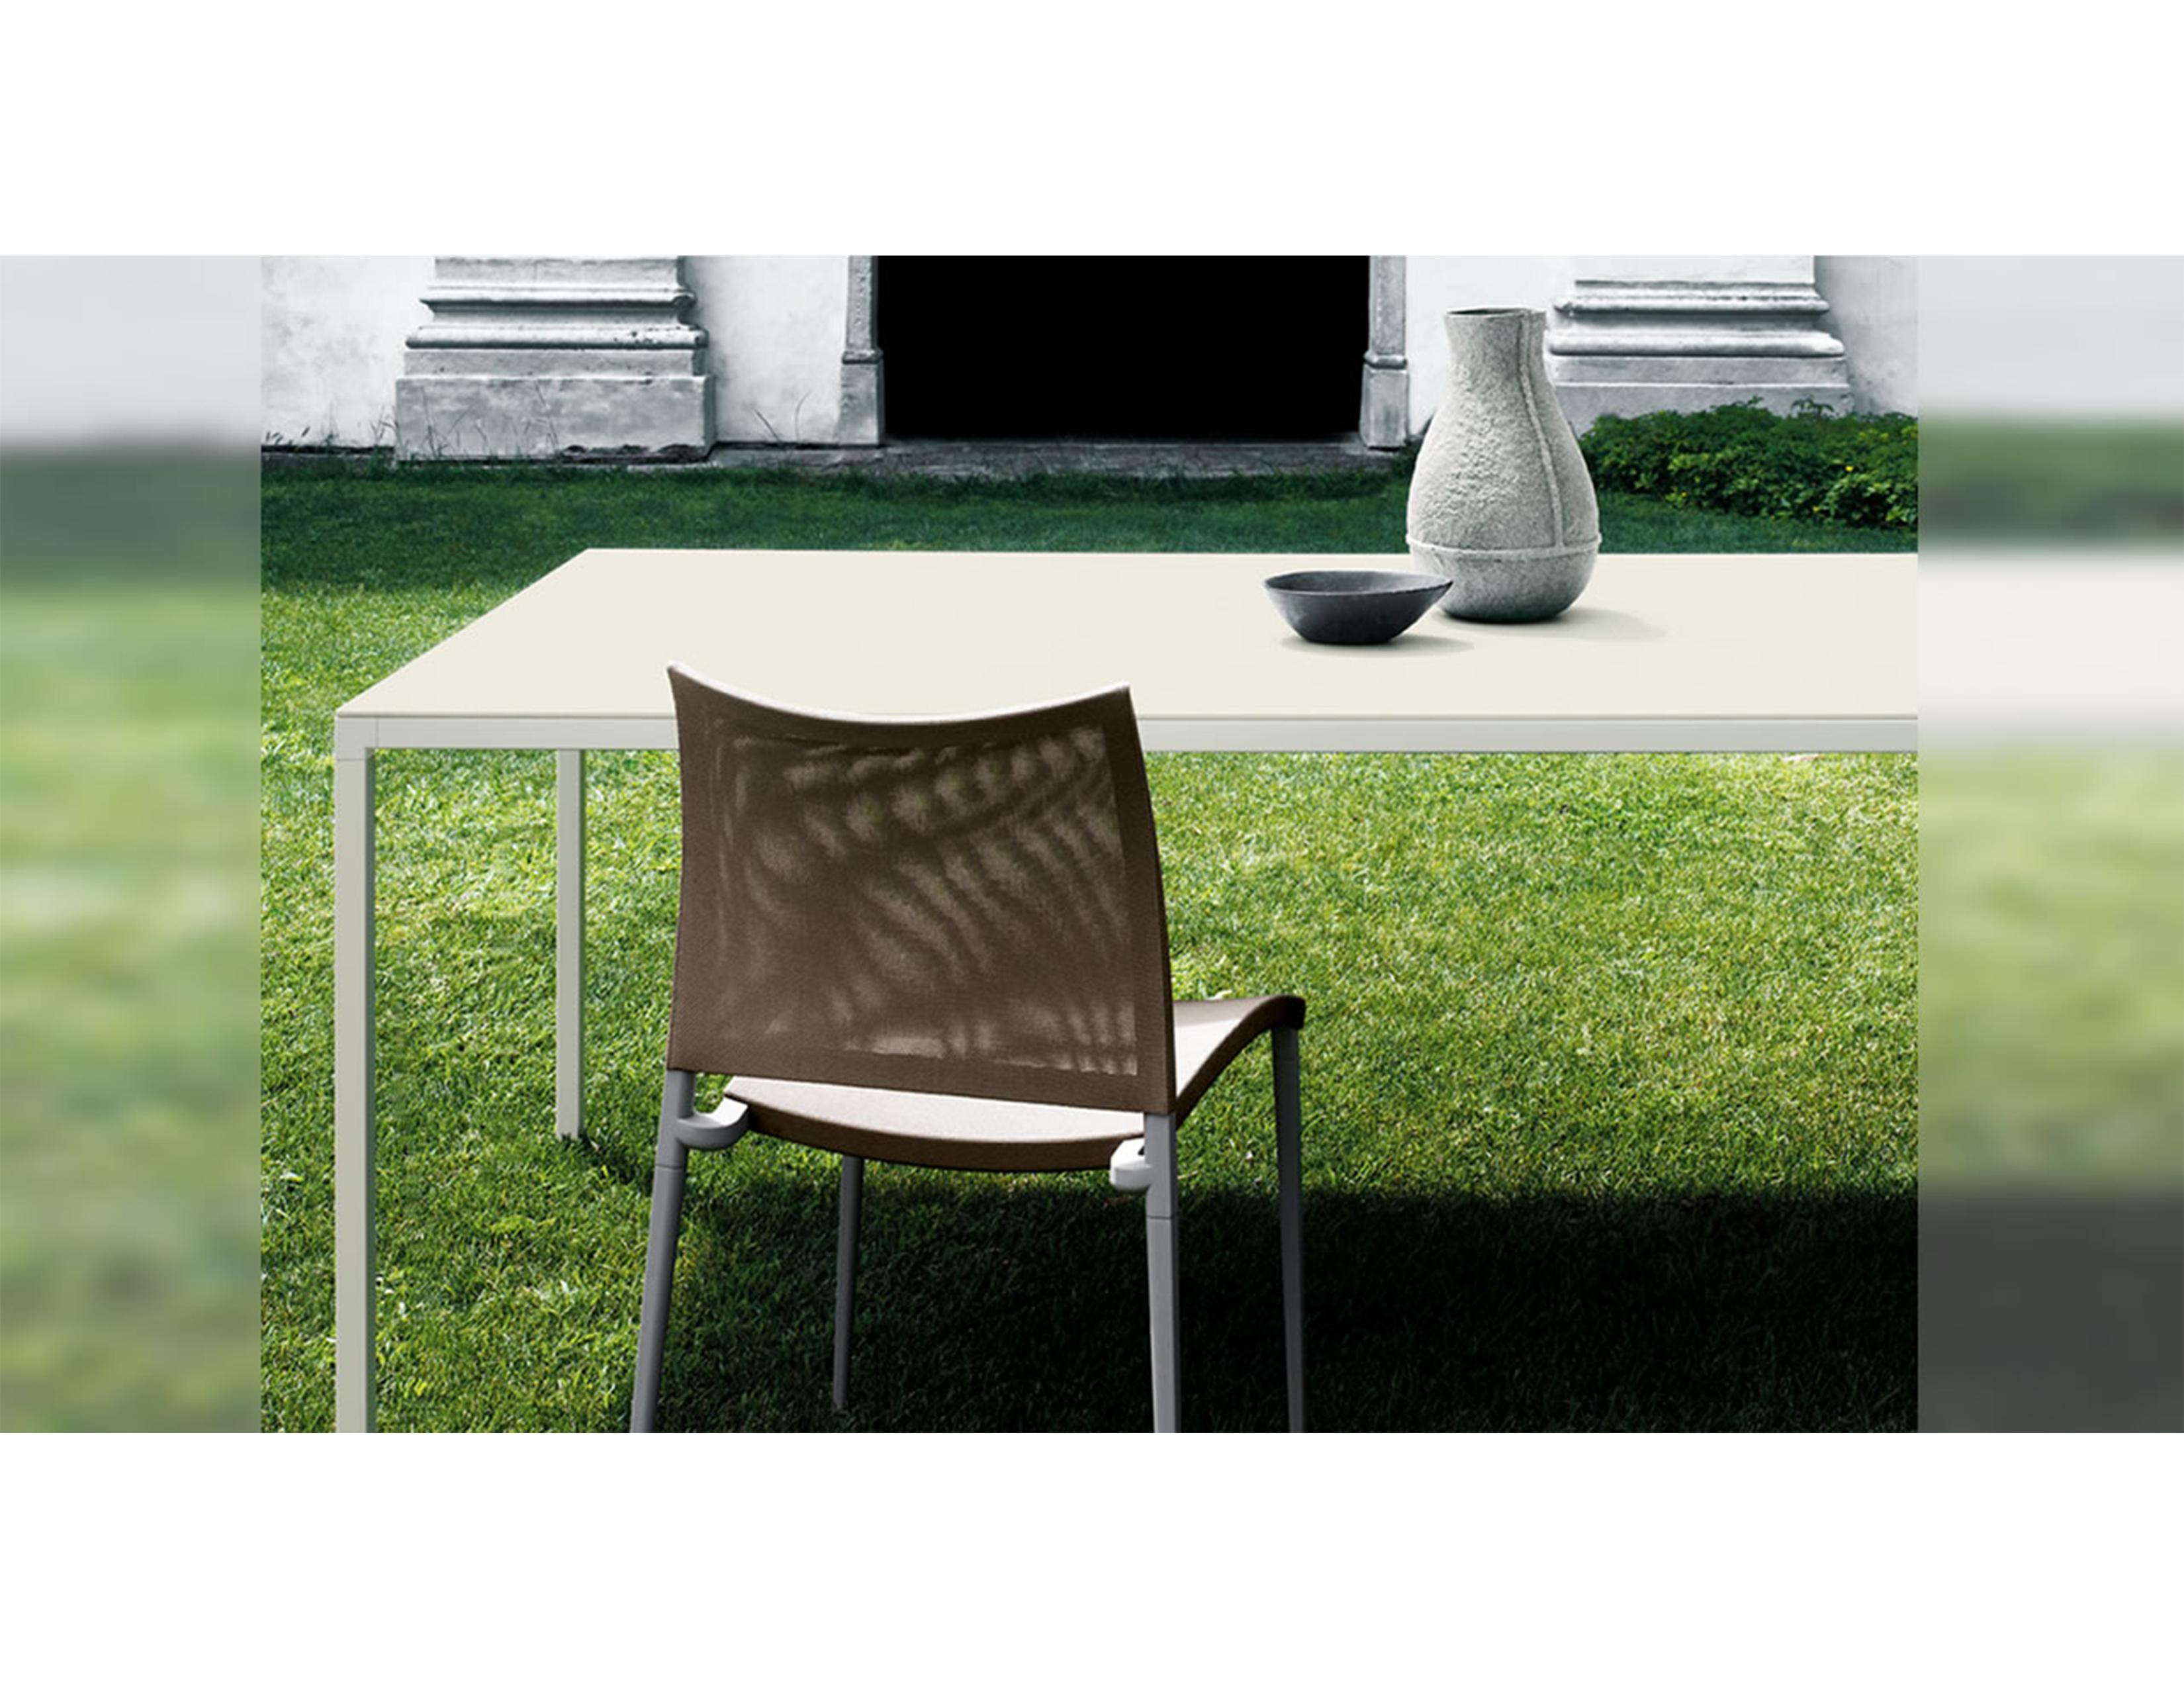 Desalto Helsinki 35 Outdoor Table with Bench by Caronni + Bonanomi For Sale 3